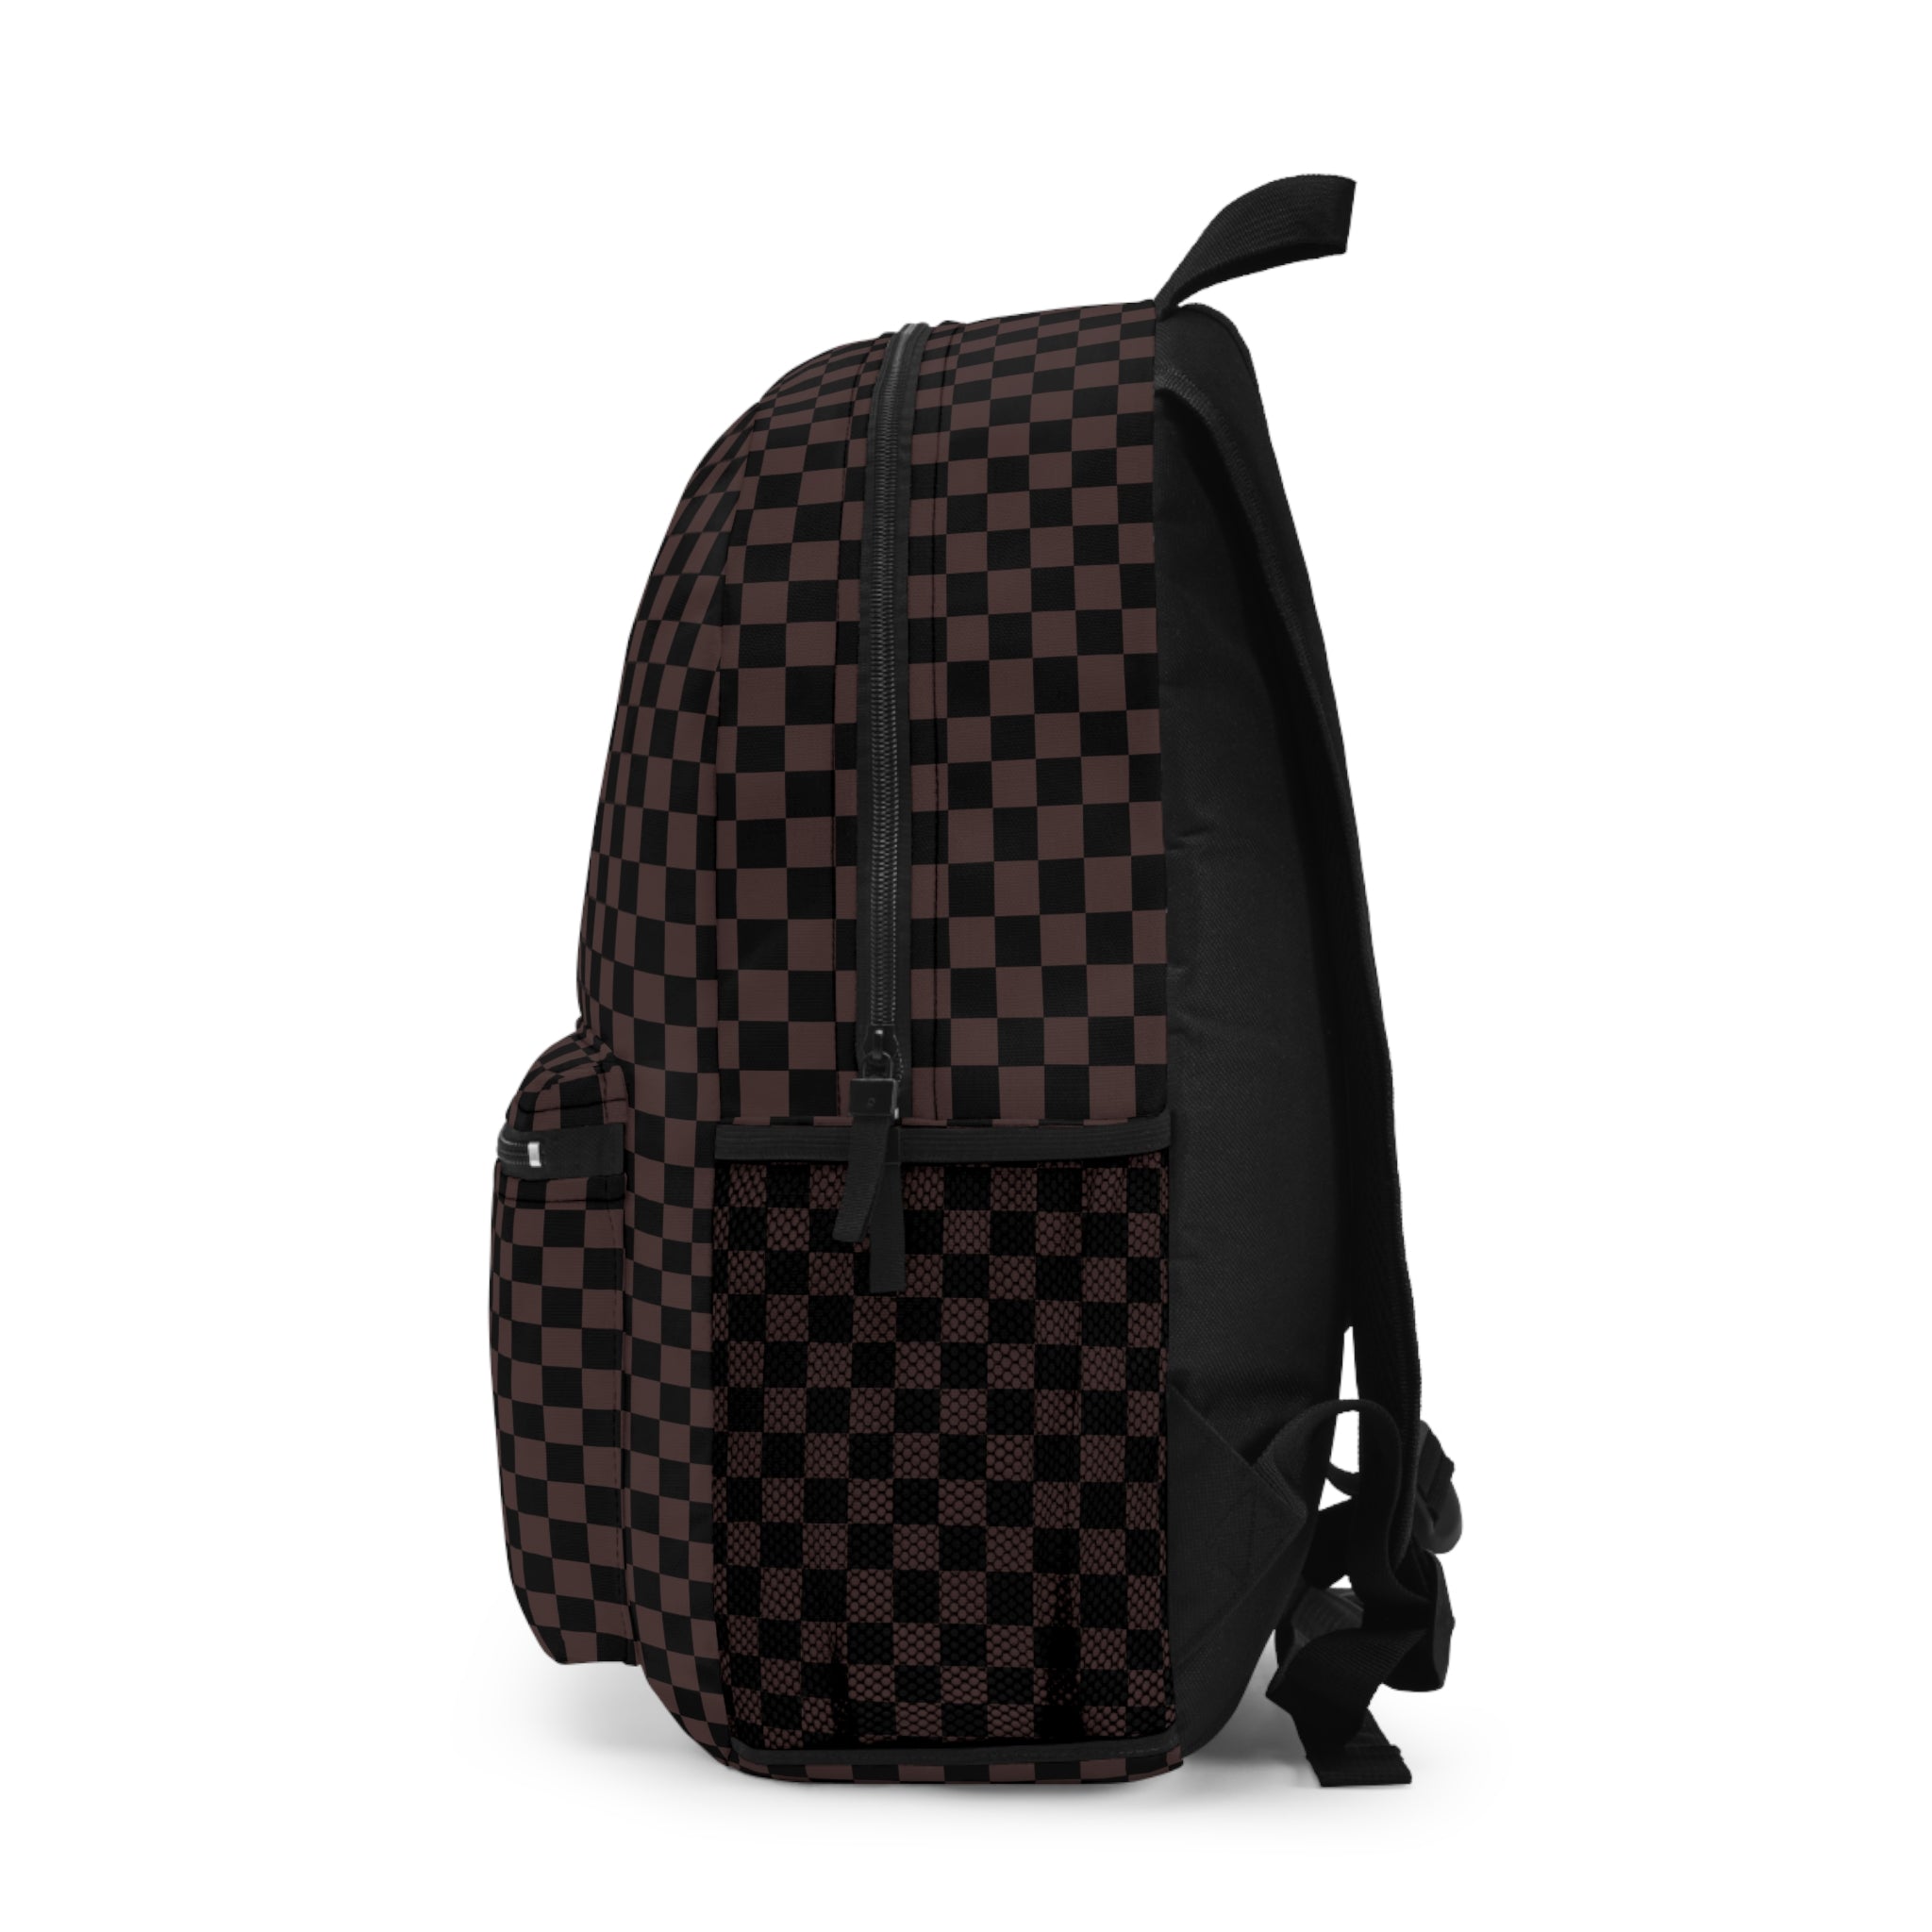  Groove Collection Check Mate (Brown) Backpack, Unisex Plaid Backpack Bags